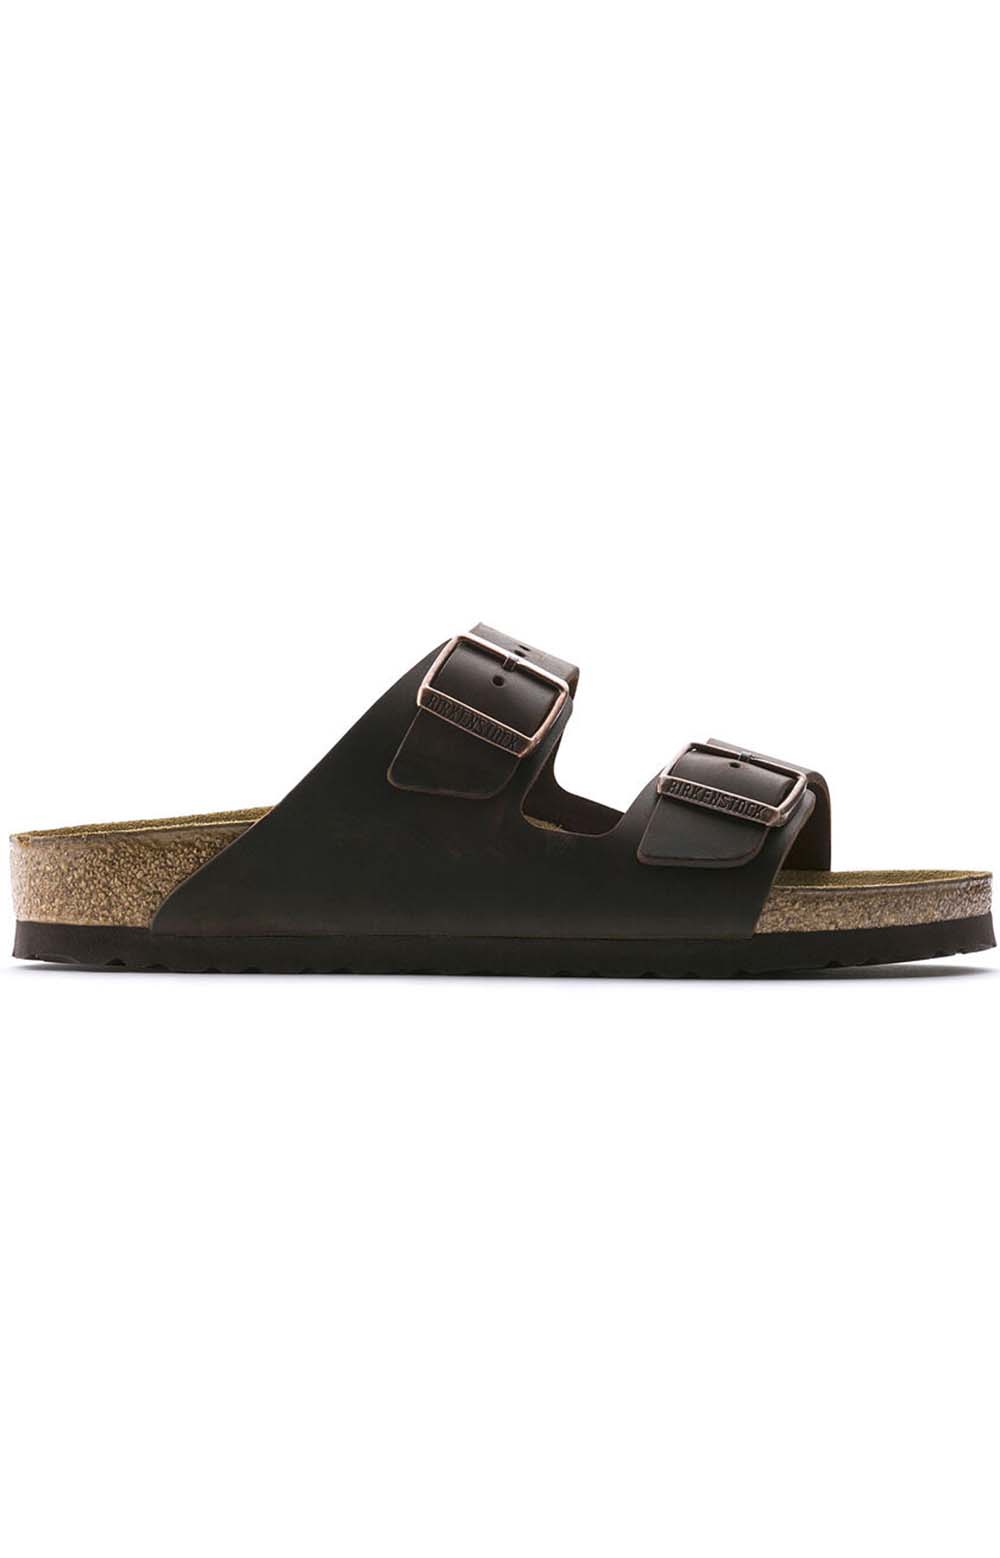 Alt text: Brown leather Birkenstock Arizona sandals with adjustable straps and contoured footbed